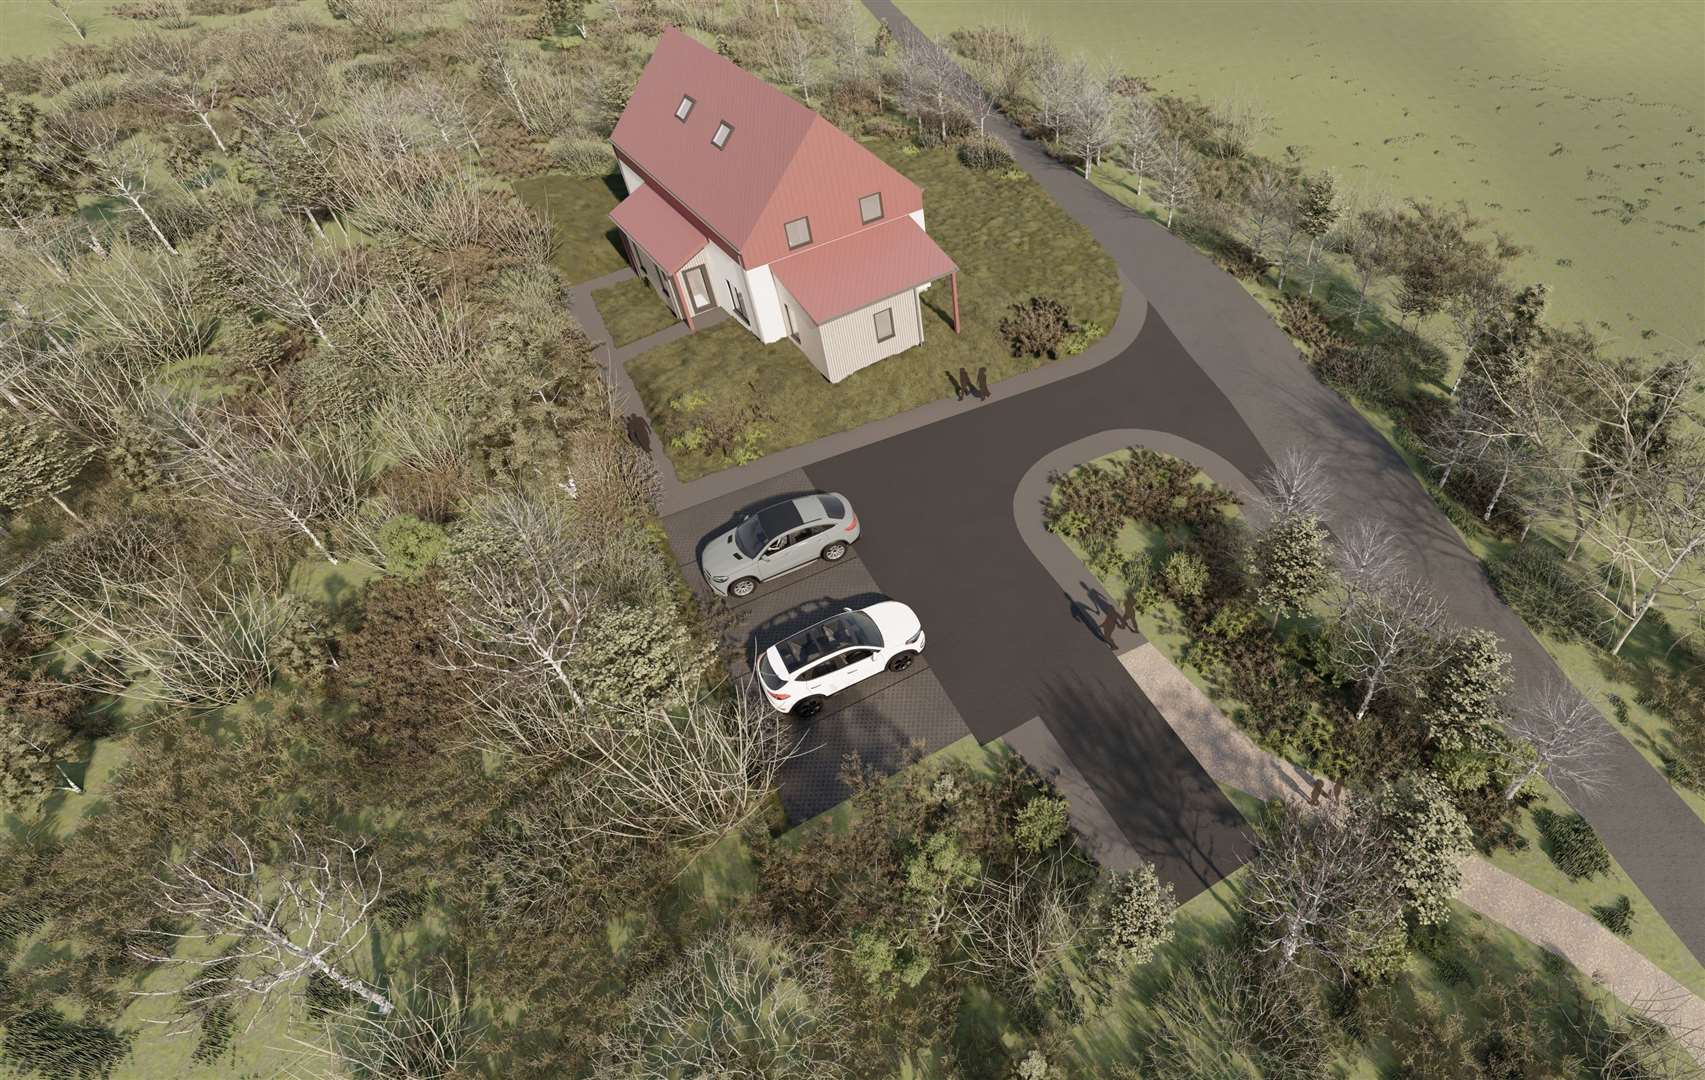 Artist's impression of an aerial view looking over Site B. Photo: Oberlanders Architects